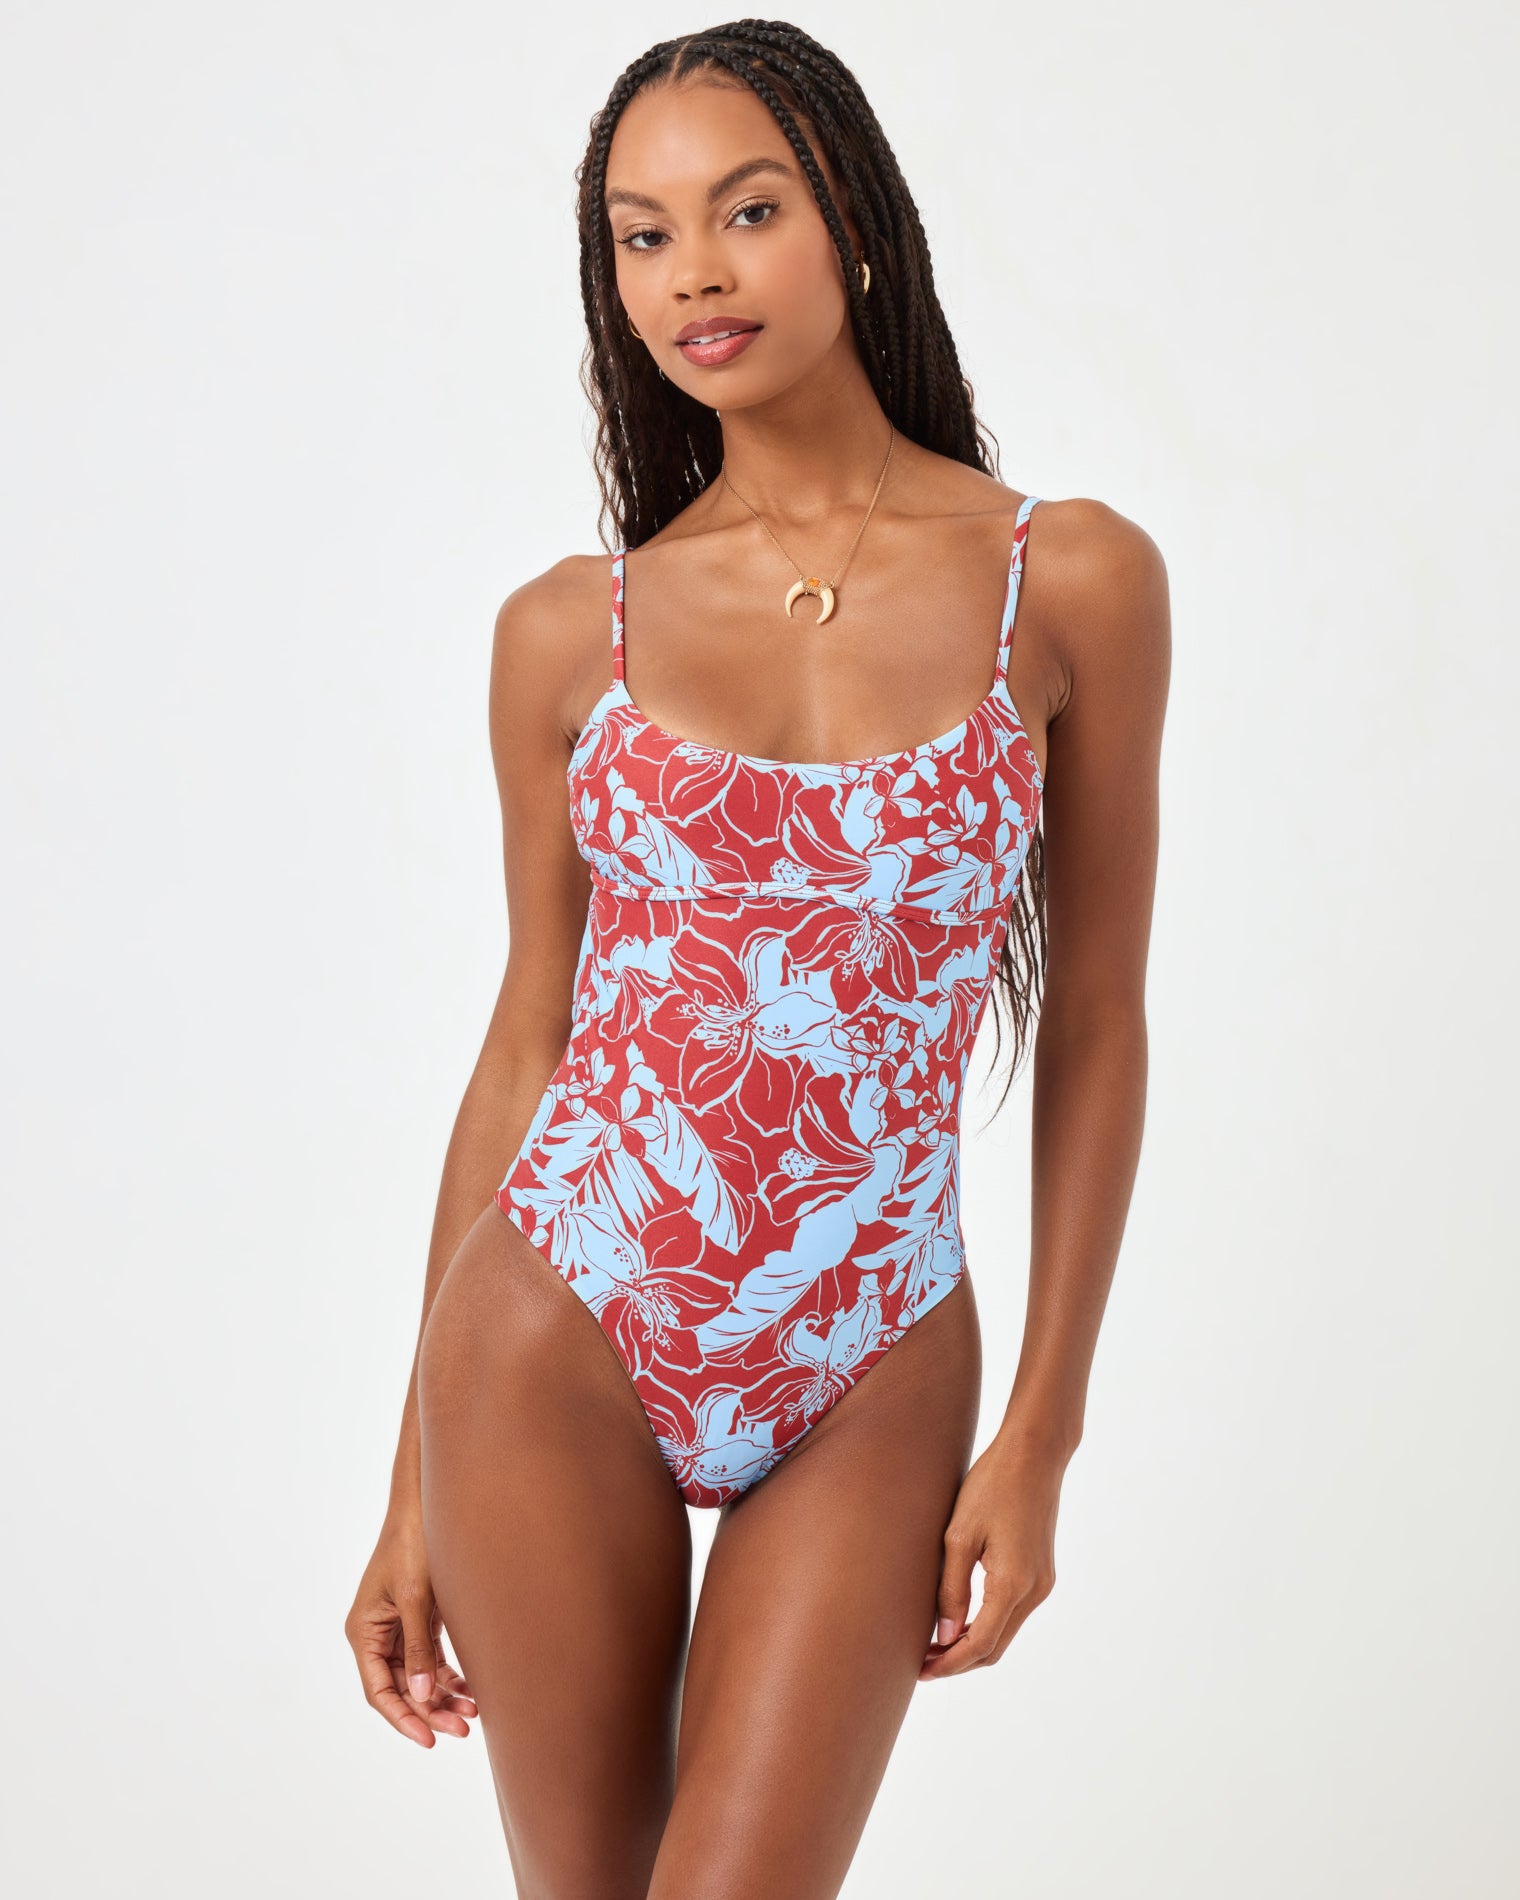 Eco Chic Econyl® Bree One Piece - Going Tropical Going Tropical | Model: Taelor (size: S) Badge:Eco Chic_#B2AC88_#ffffff